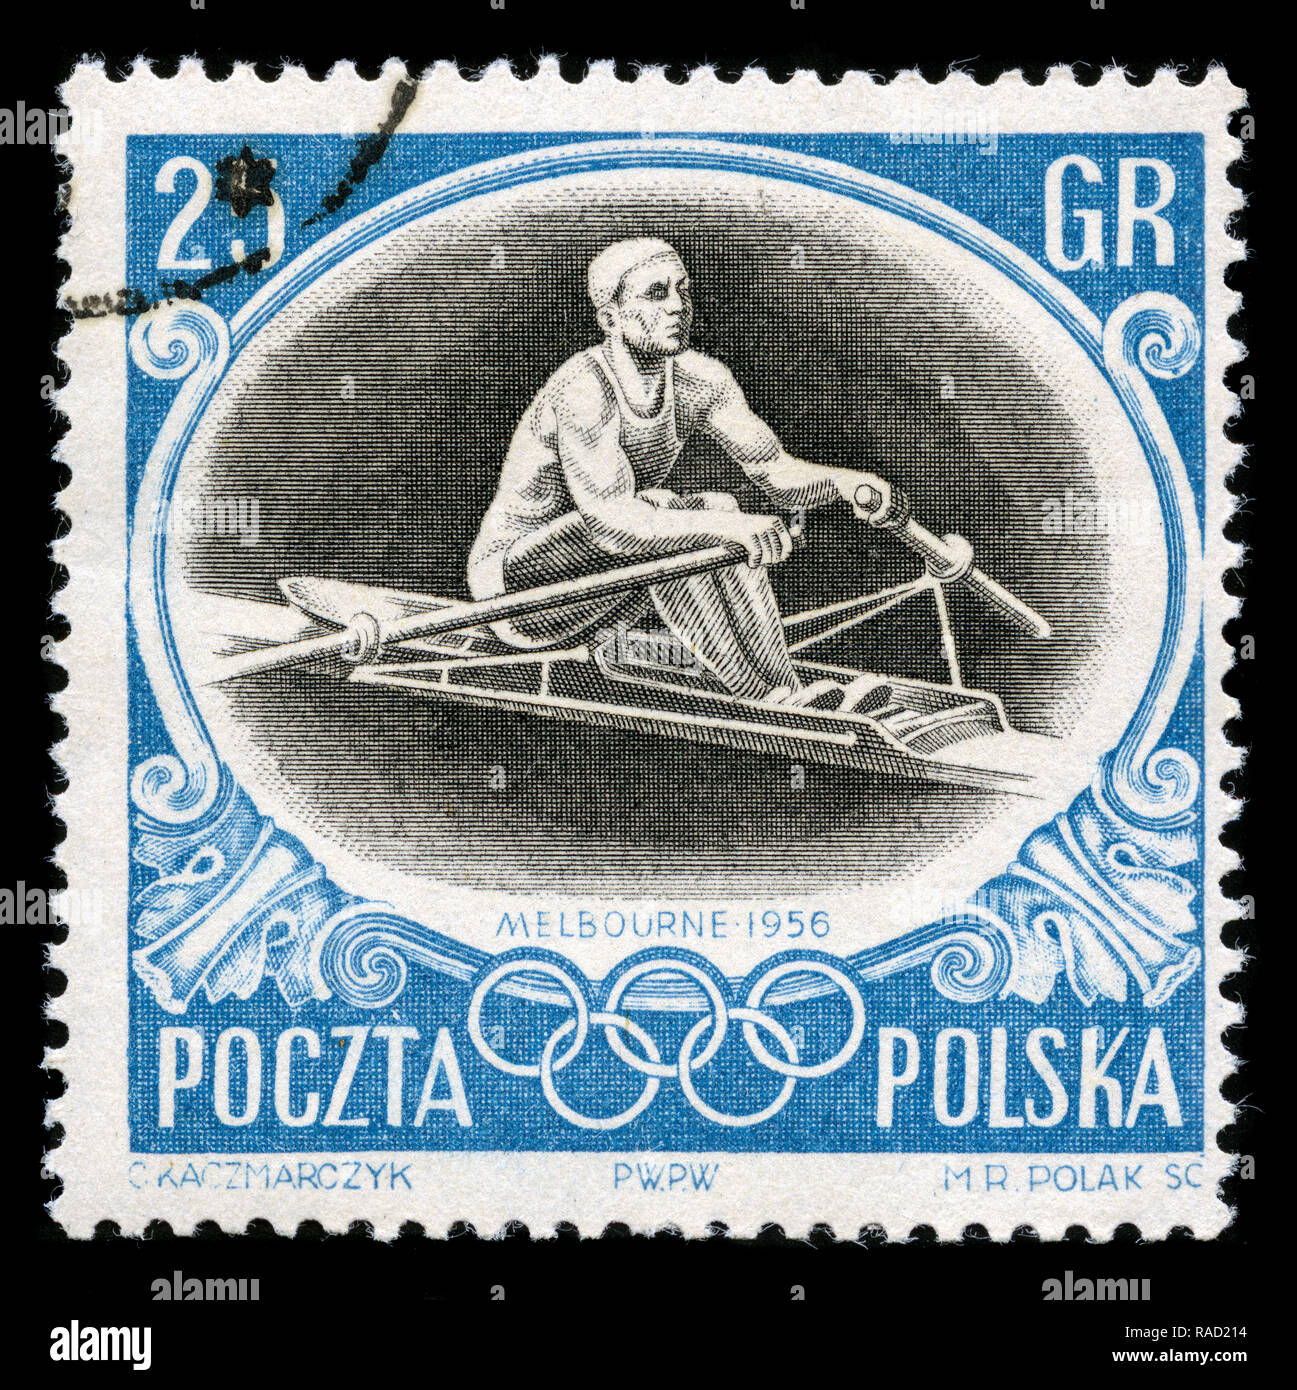 Postage stamps from the Poland in the Olympic Games 1956 - Melbourne series Stock Photo